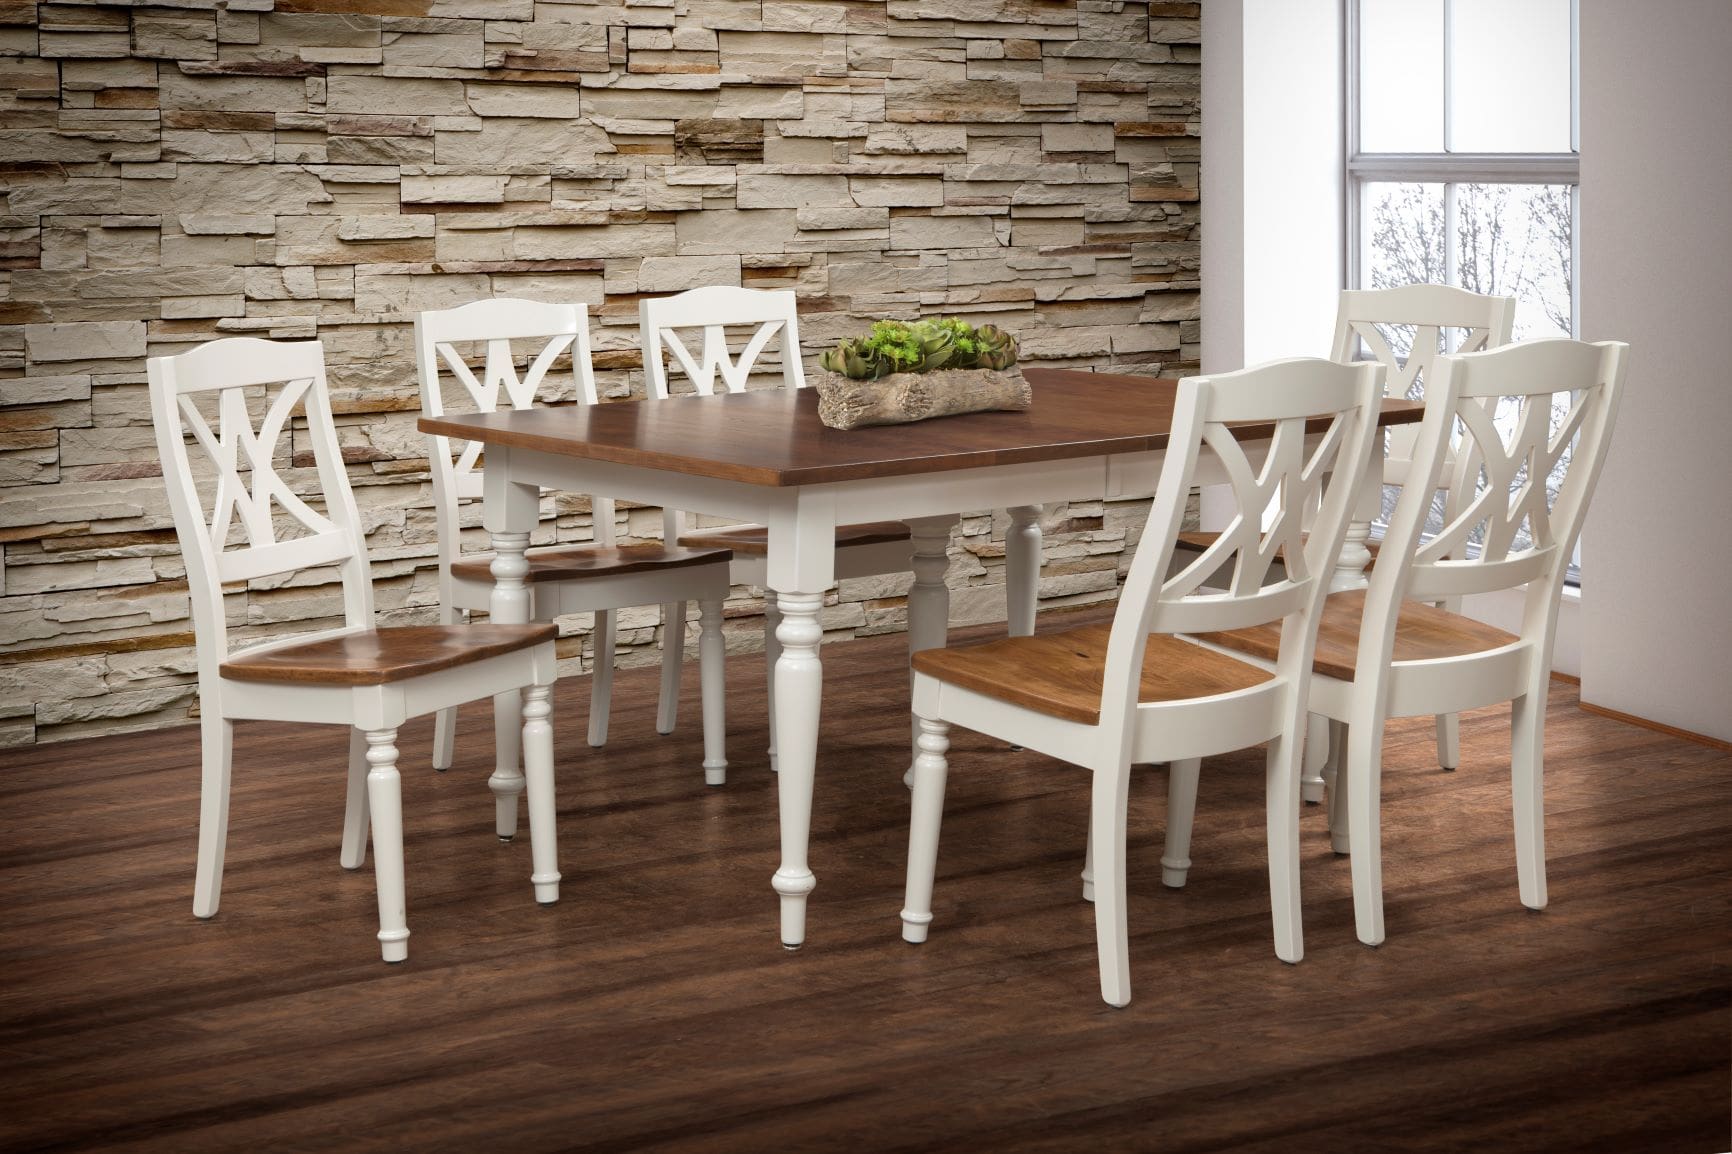 Kings Impressions dining set